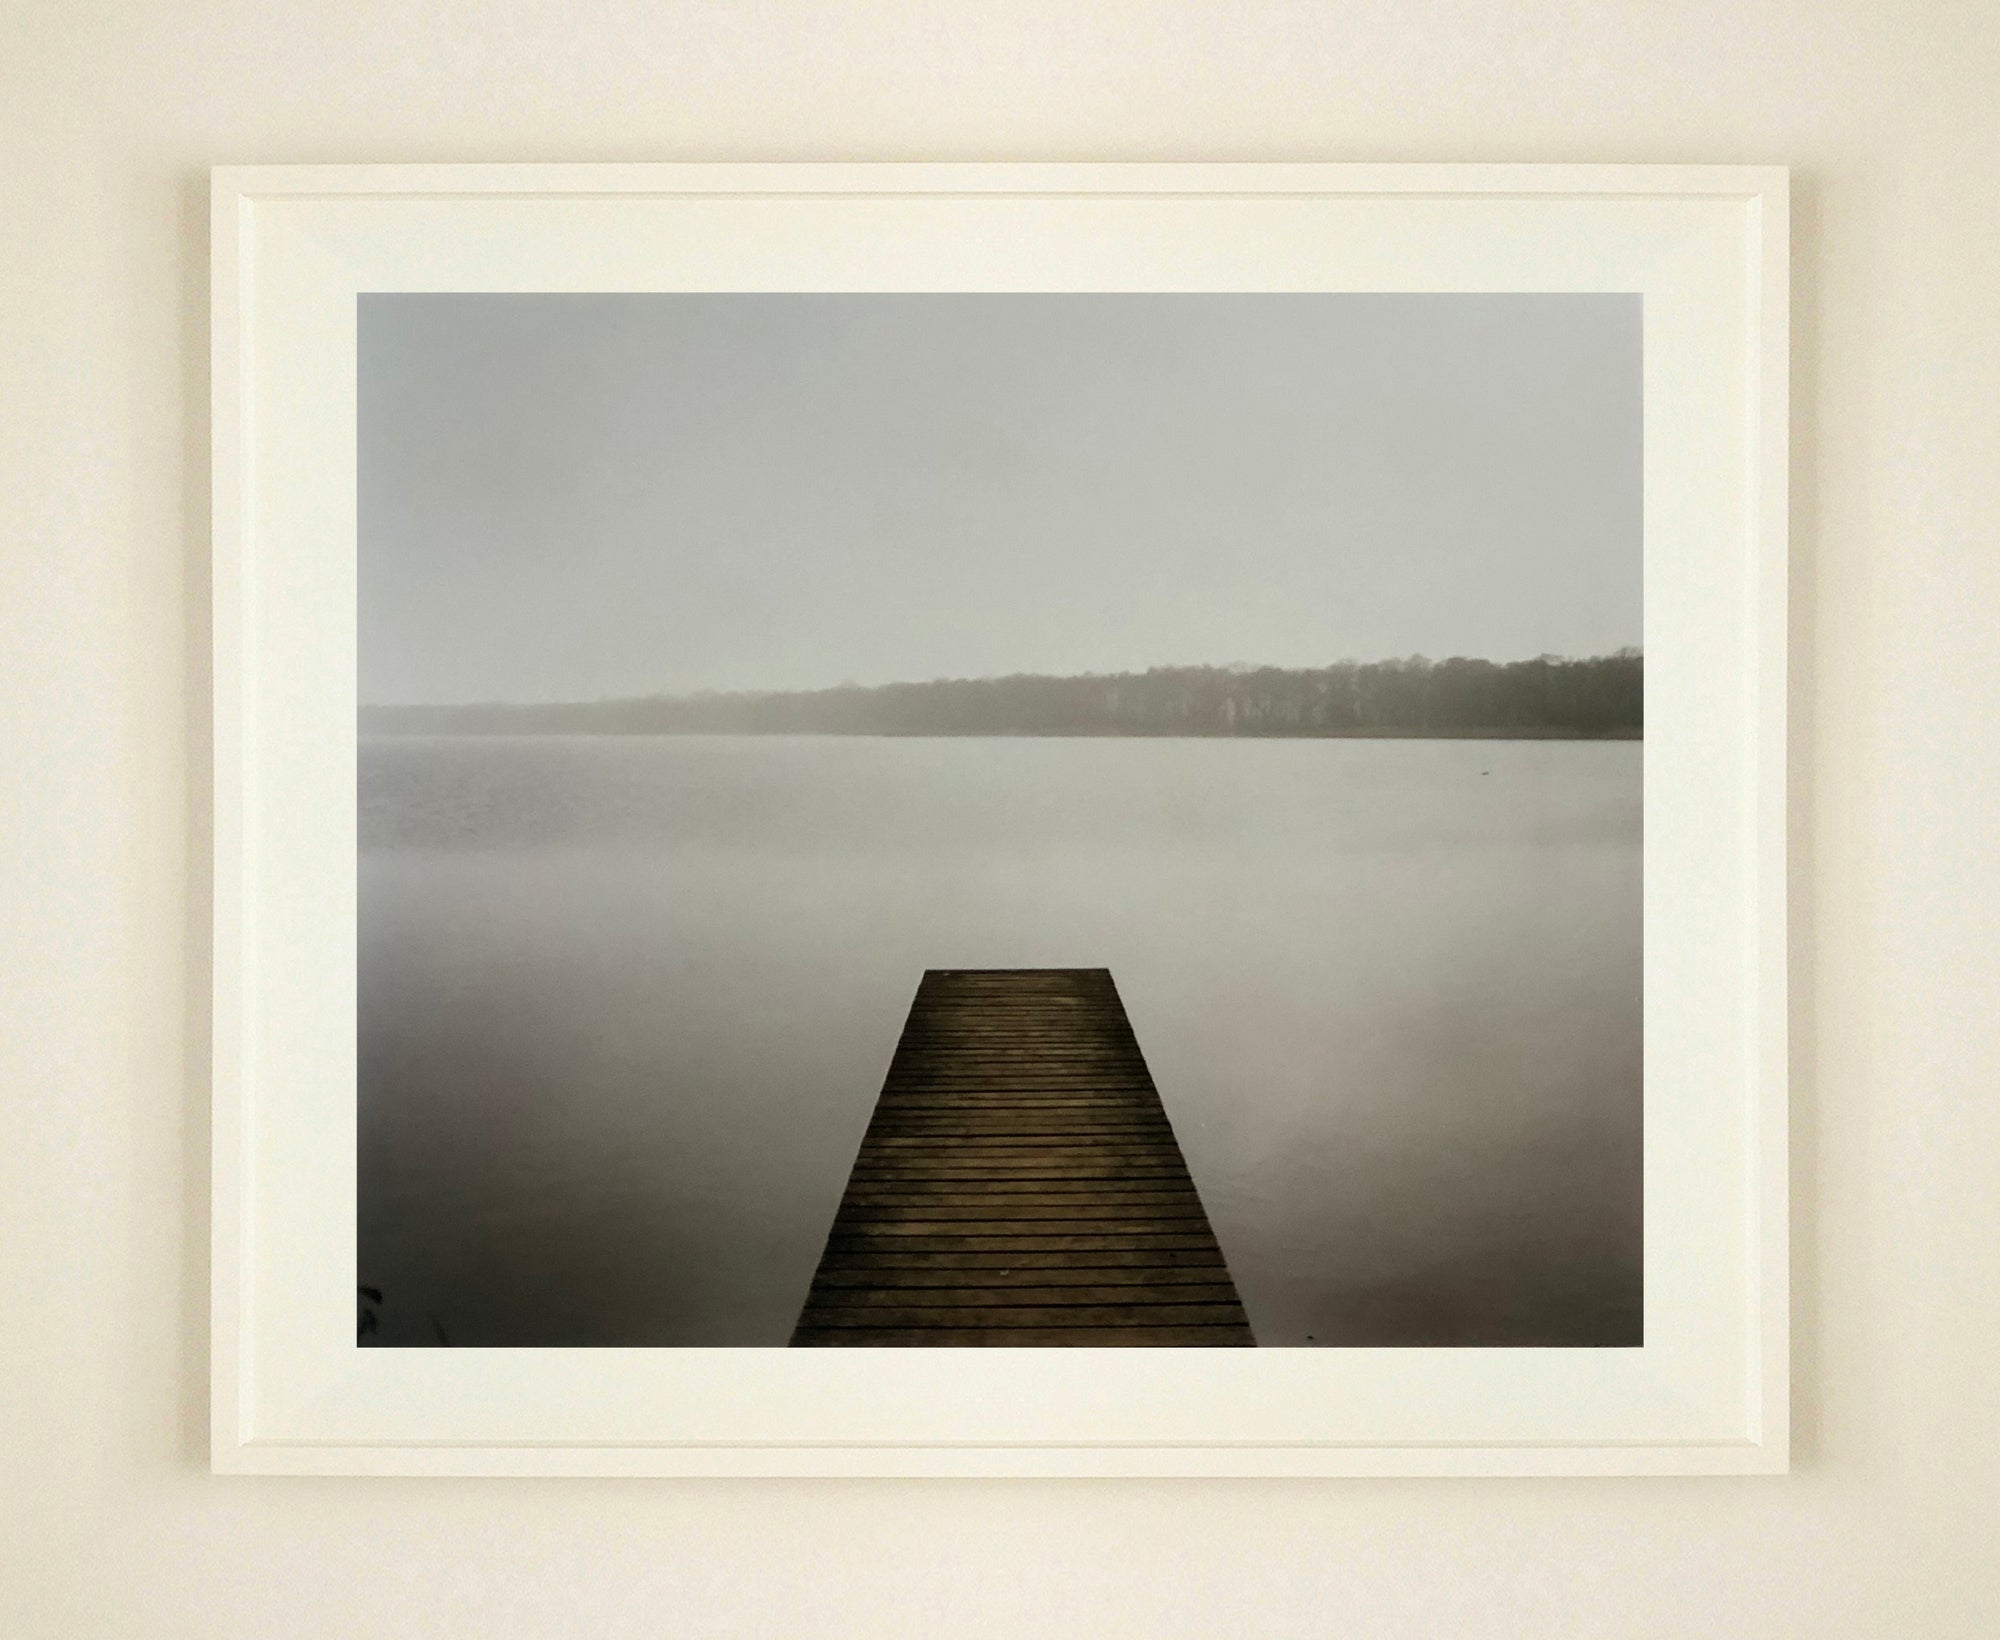 Richard shot 'Barton Broad' in one of his favourite areas of Britain on the east coast in Norfolk. This peaceful almost monochrome landscape/waterscape creates a feeling of escapism from the hustle and bustle world. 